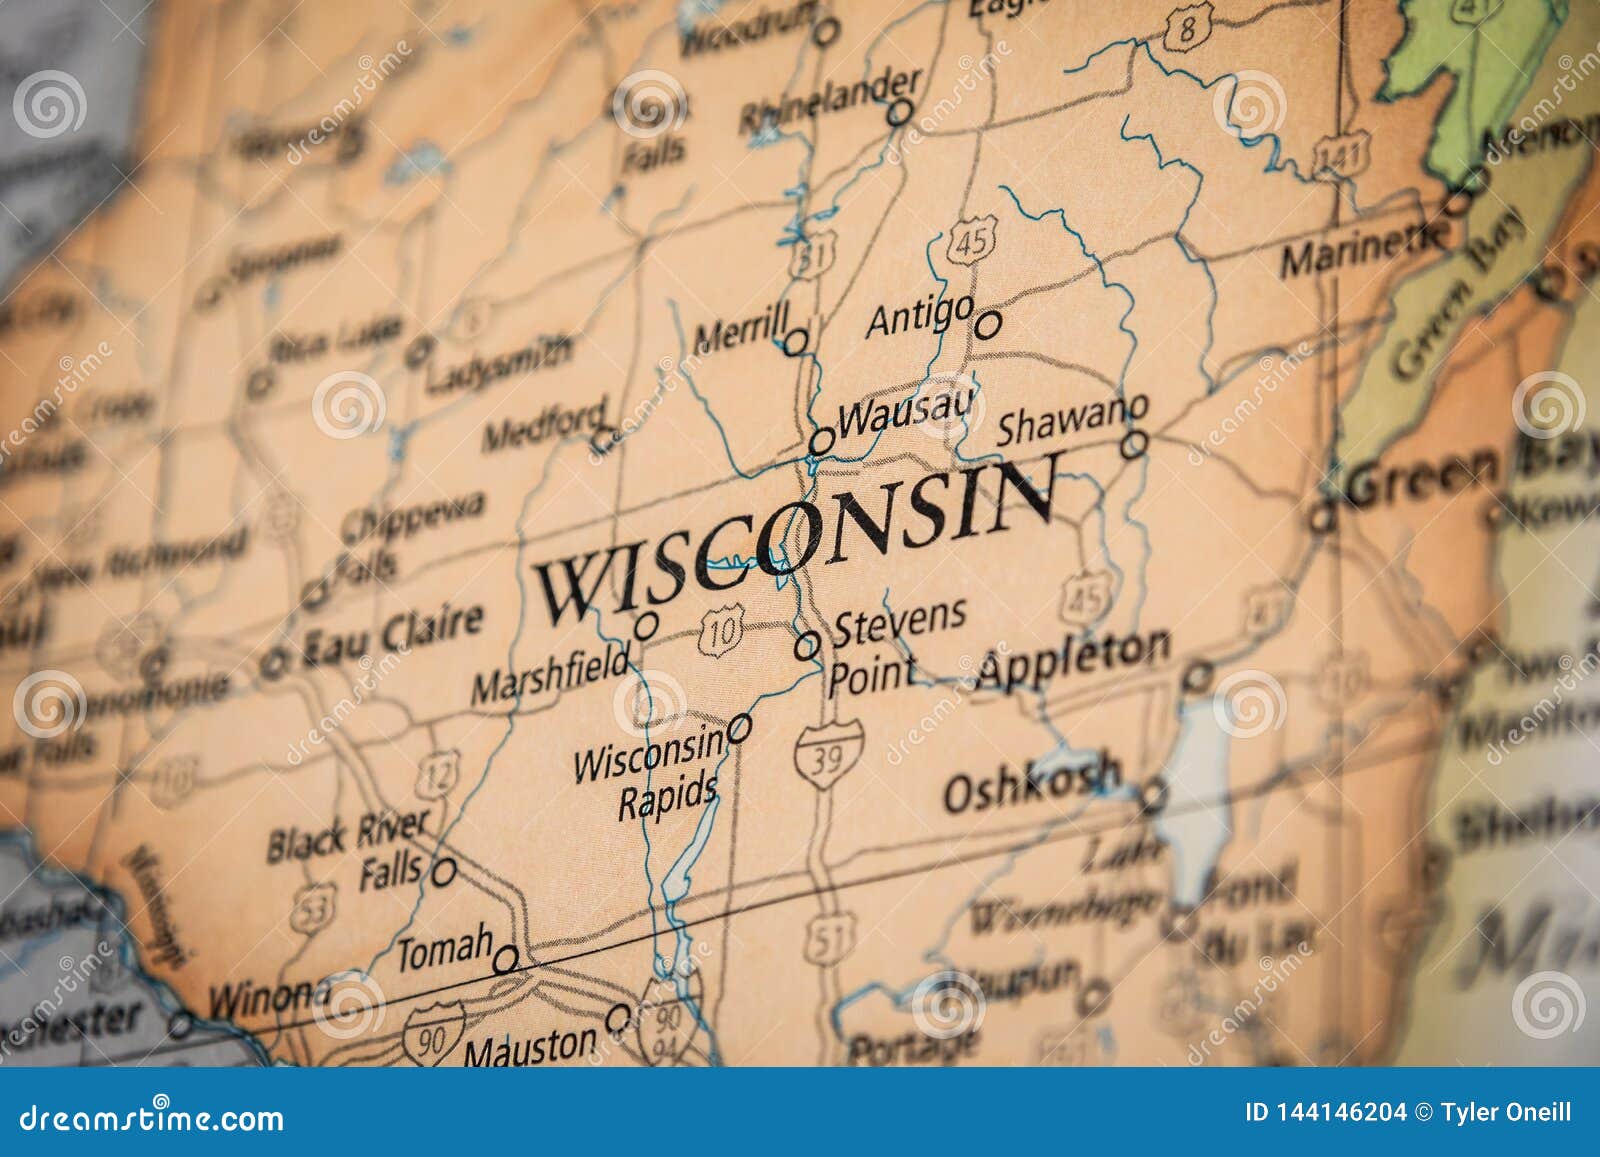 selective focus of wisconsin state on a geographical and political state map of the usa